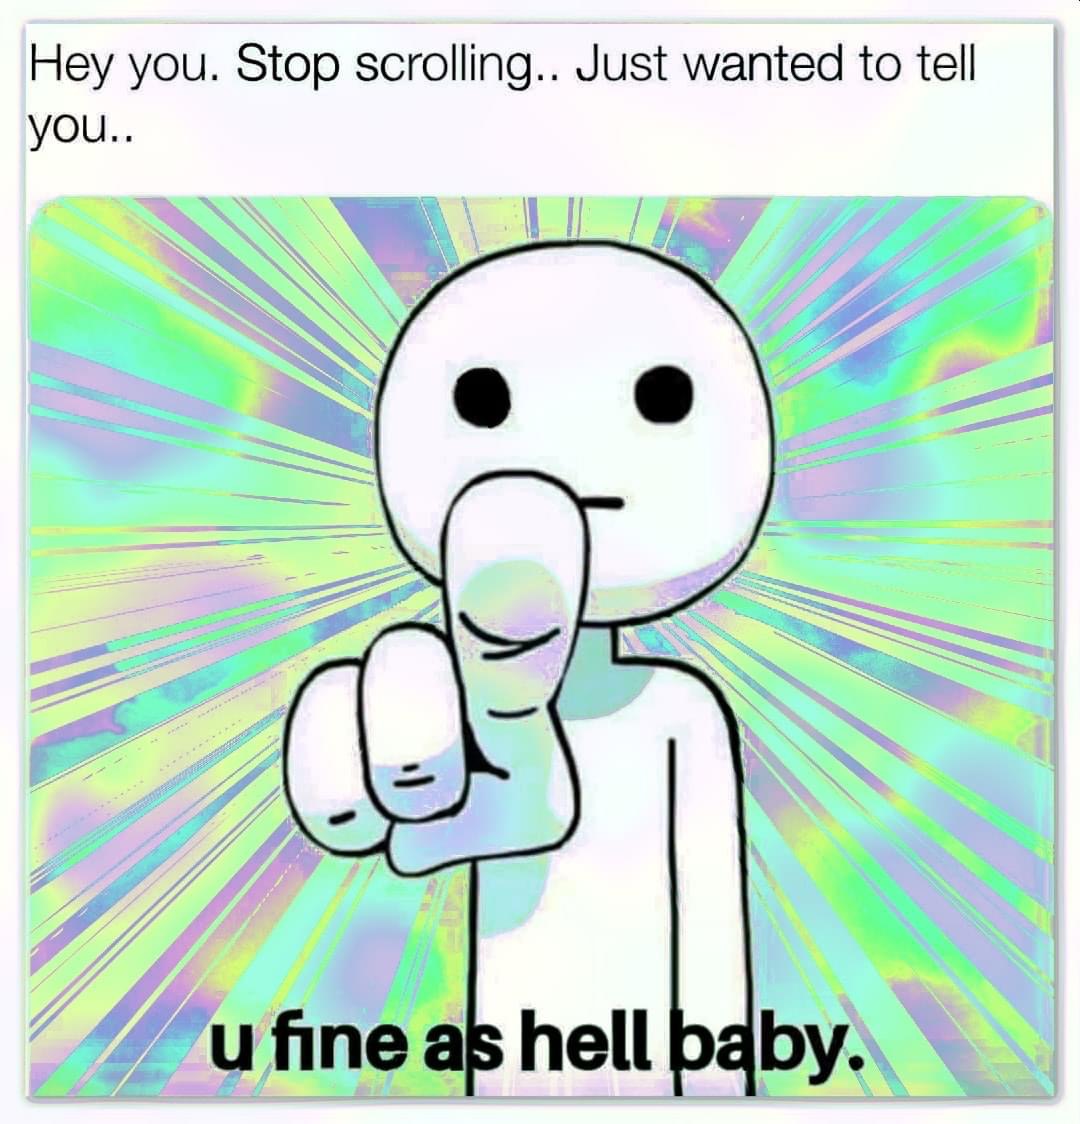 cartoon - Hey you. Stop scrolling.. Just wanted to tell you.. u fine as hell baby.